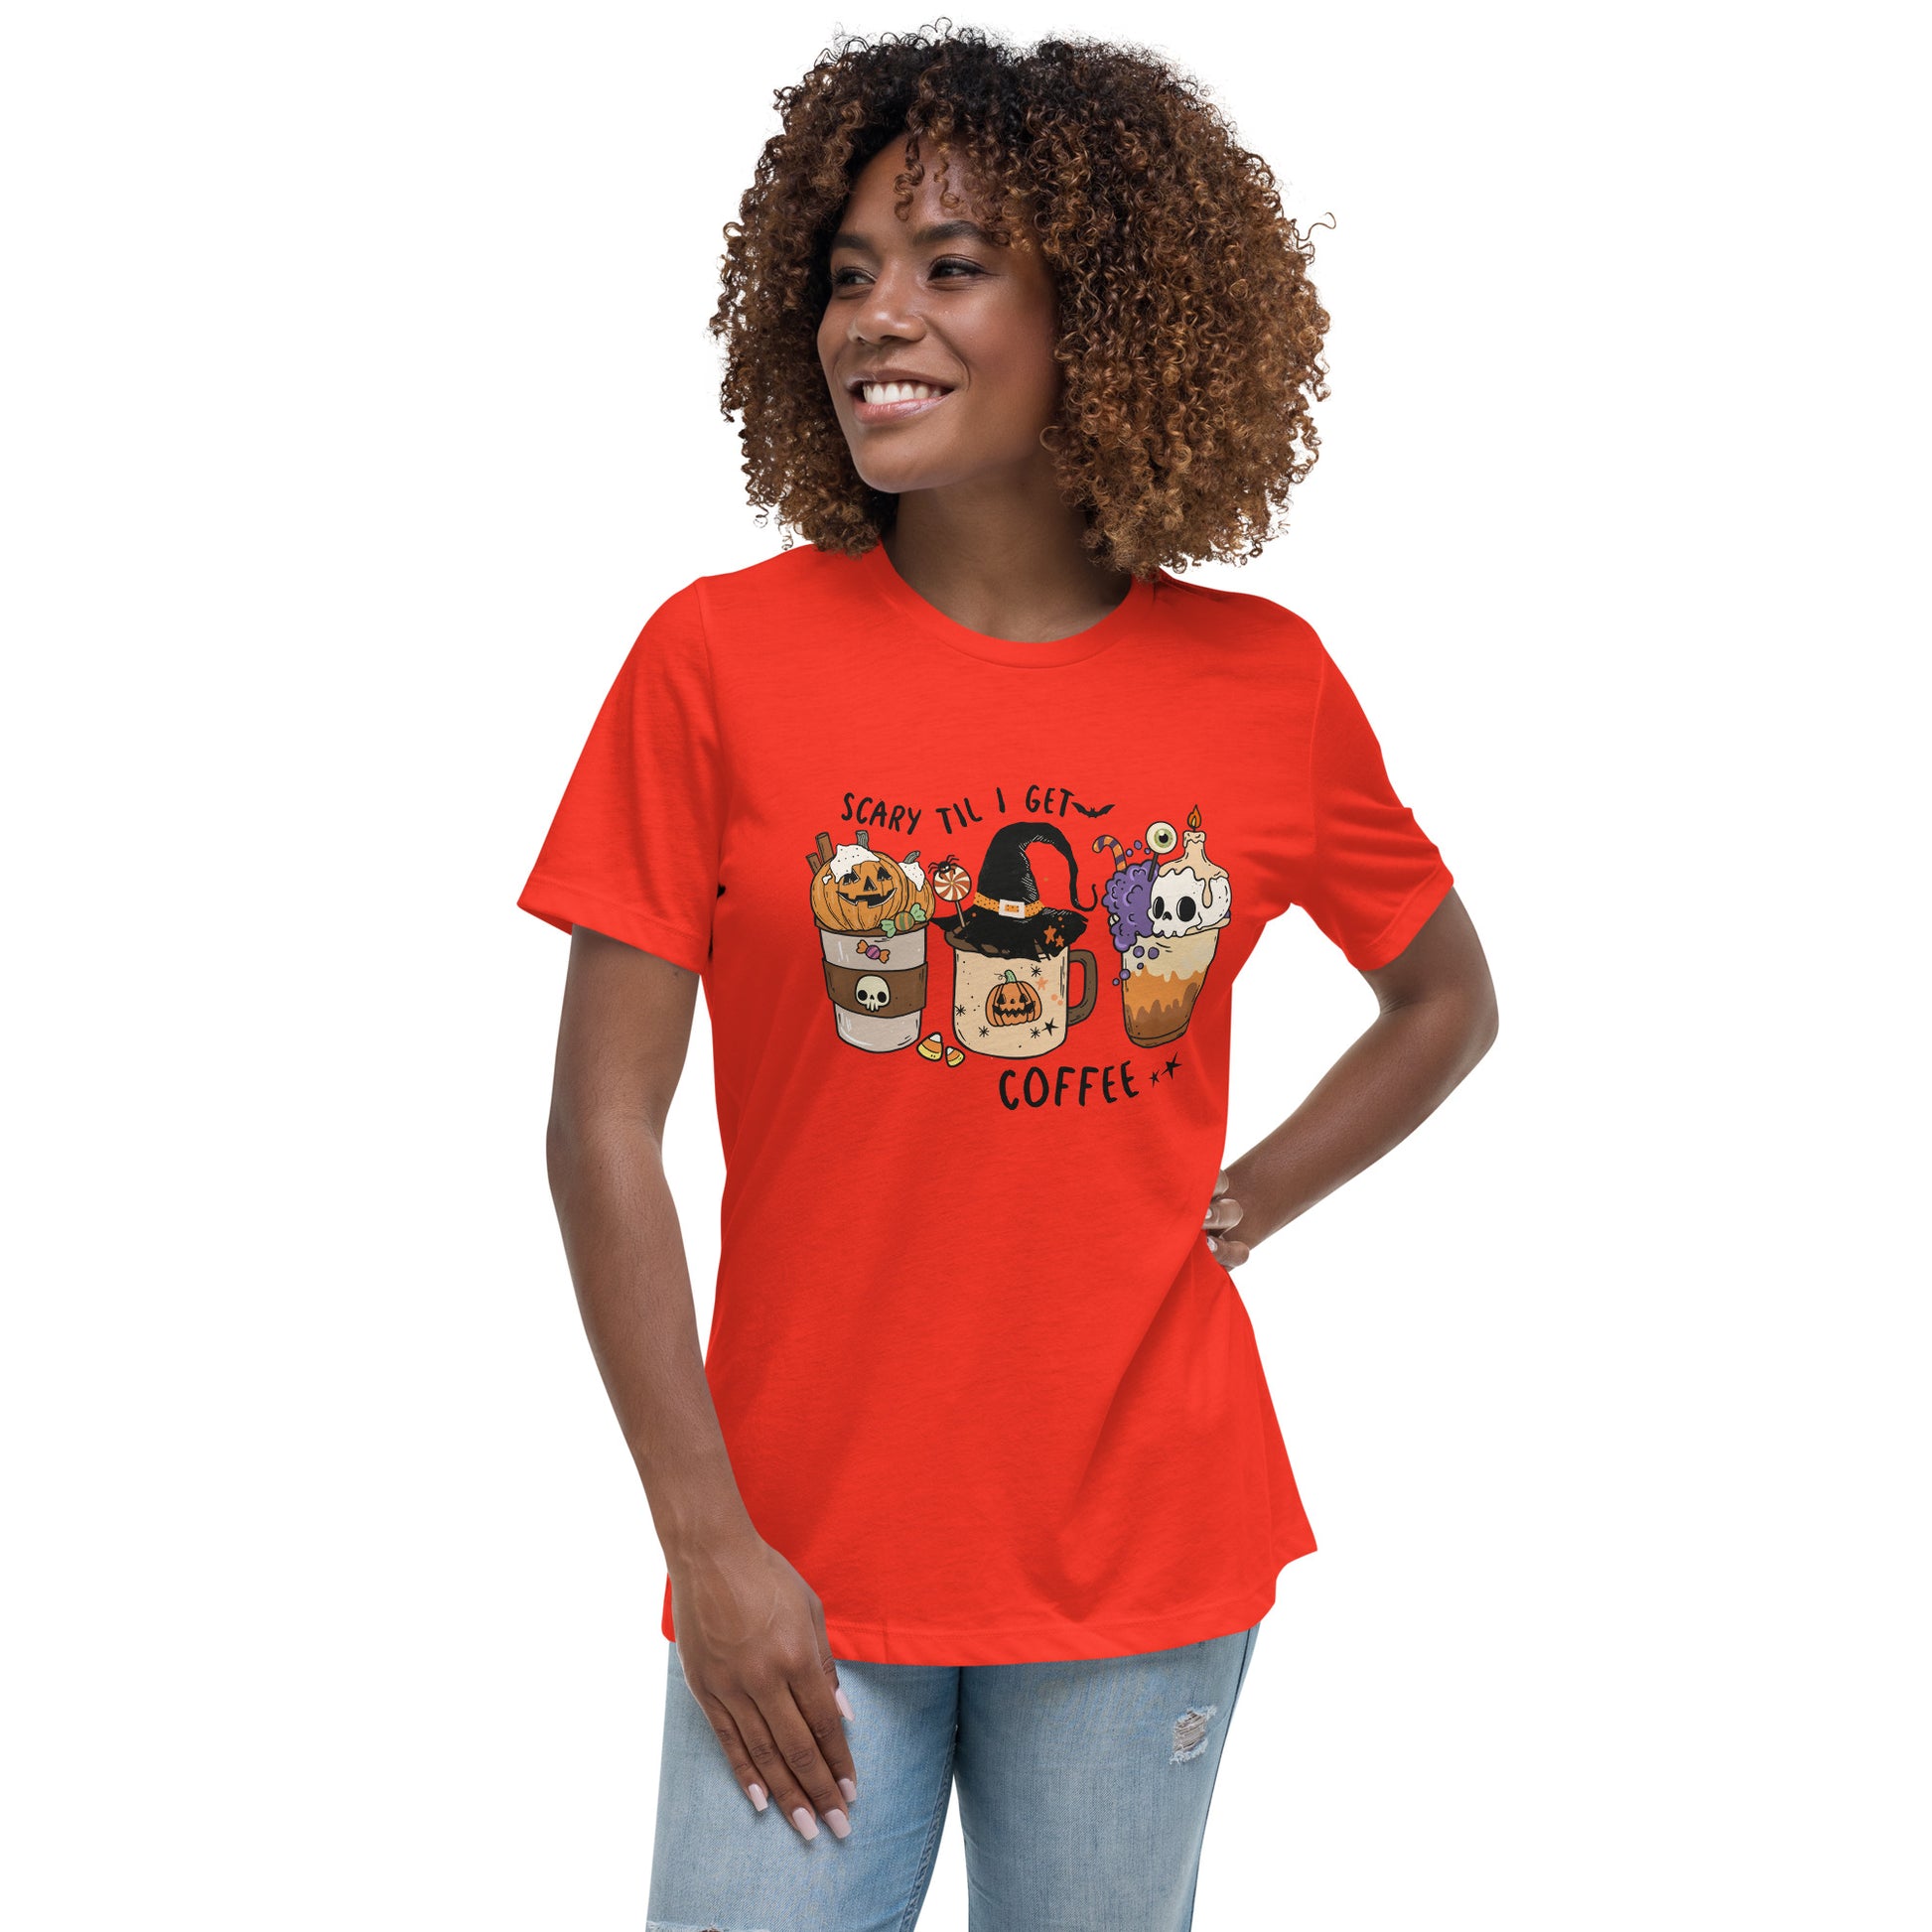 Scary Til I Get Coffee Women's Relaxed T-Shirt Tee Tshirt